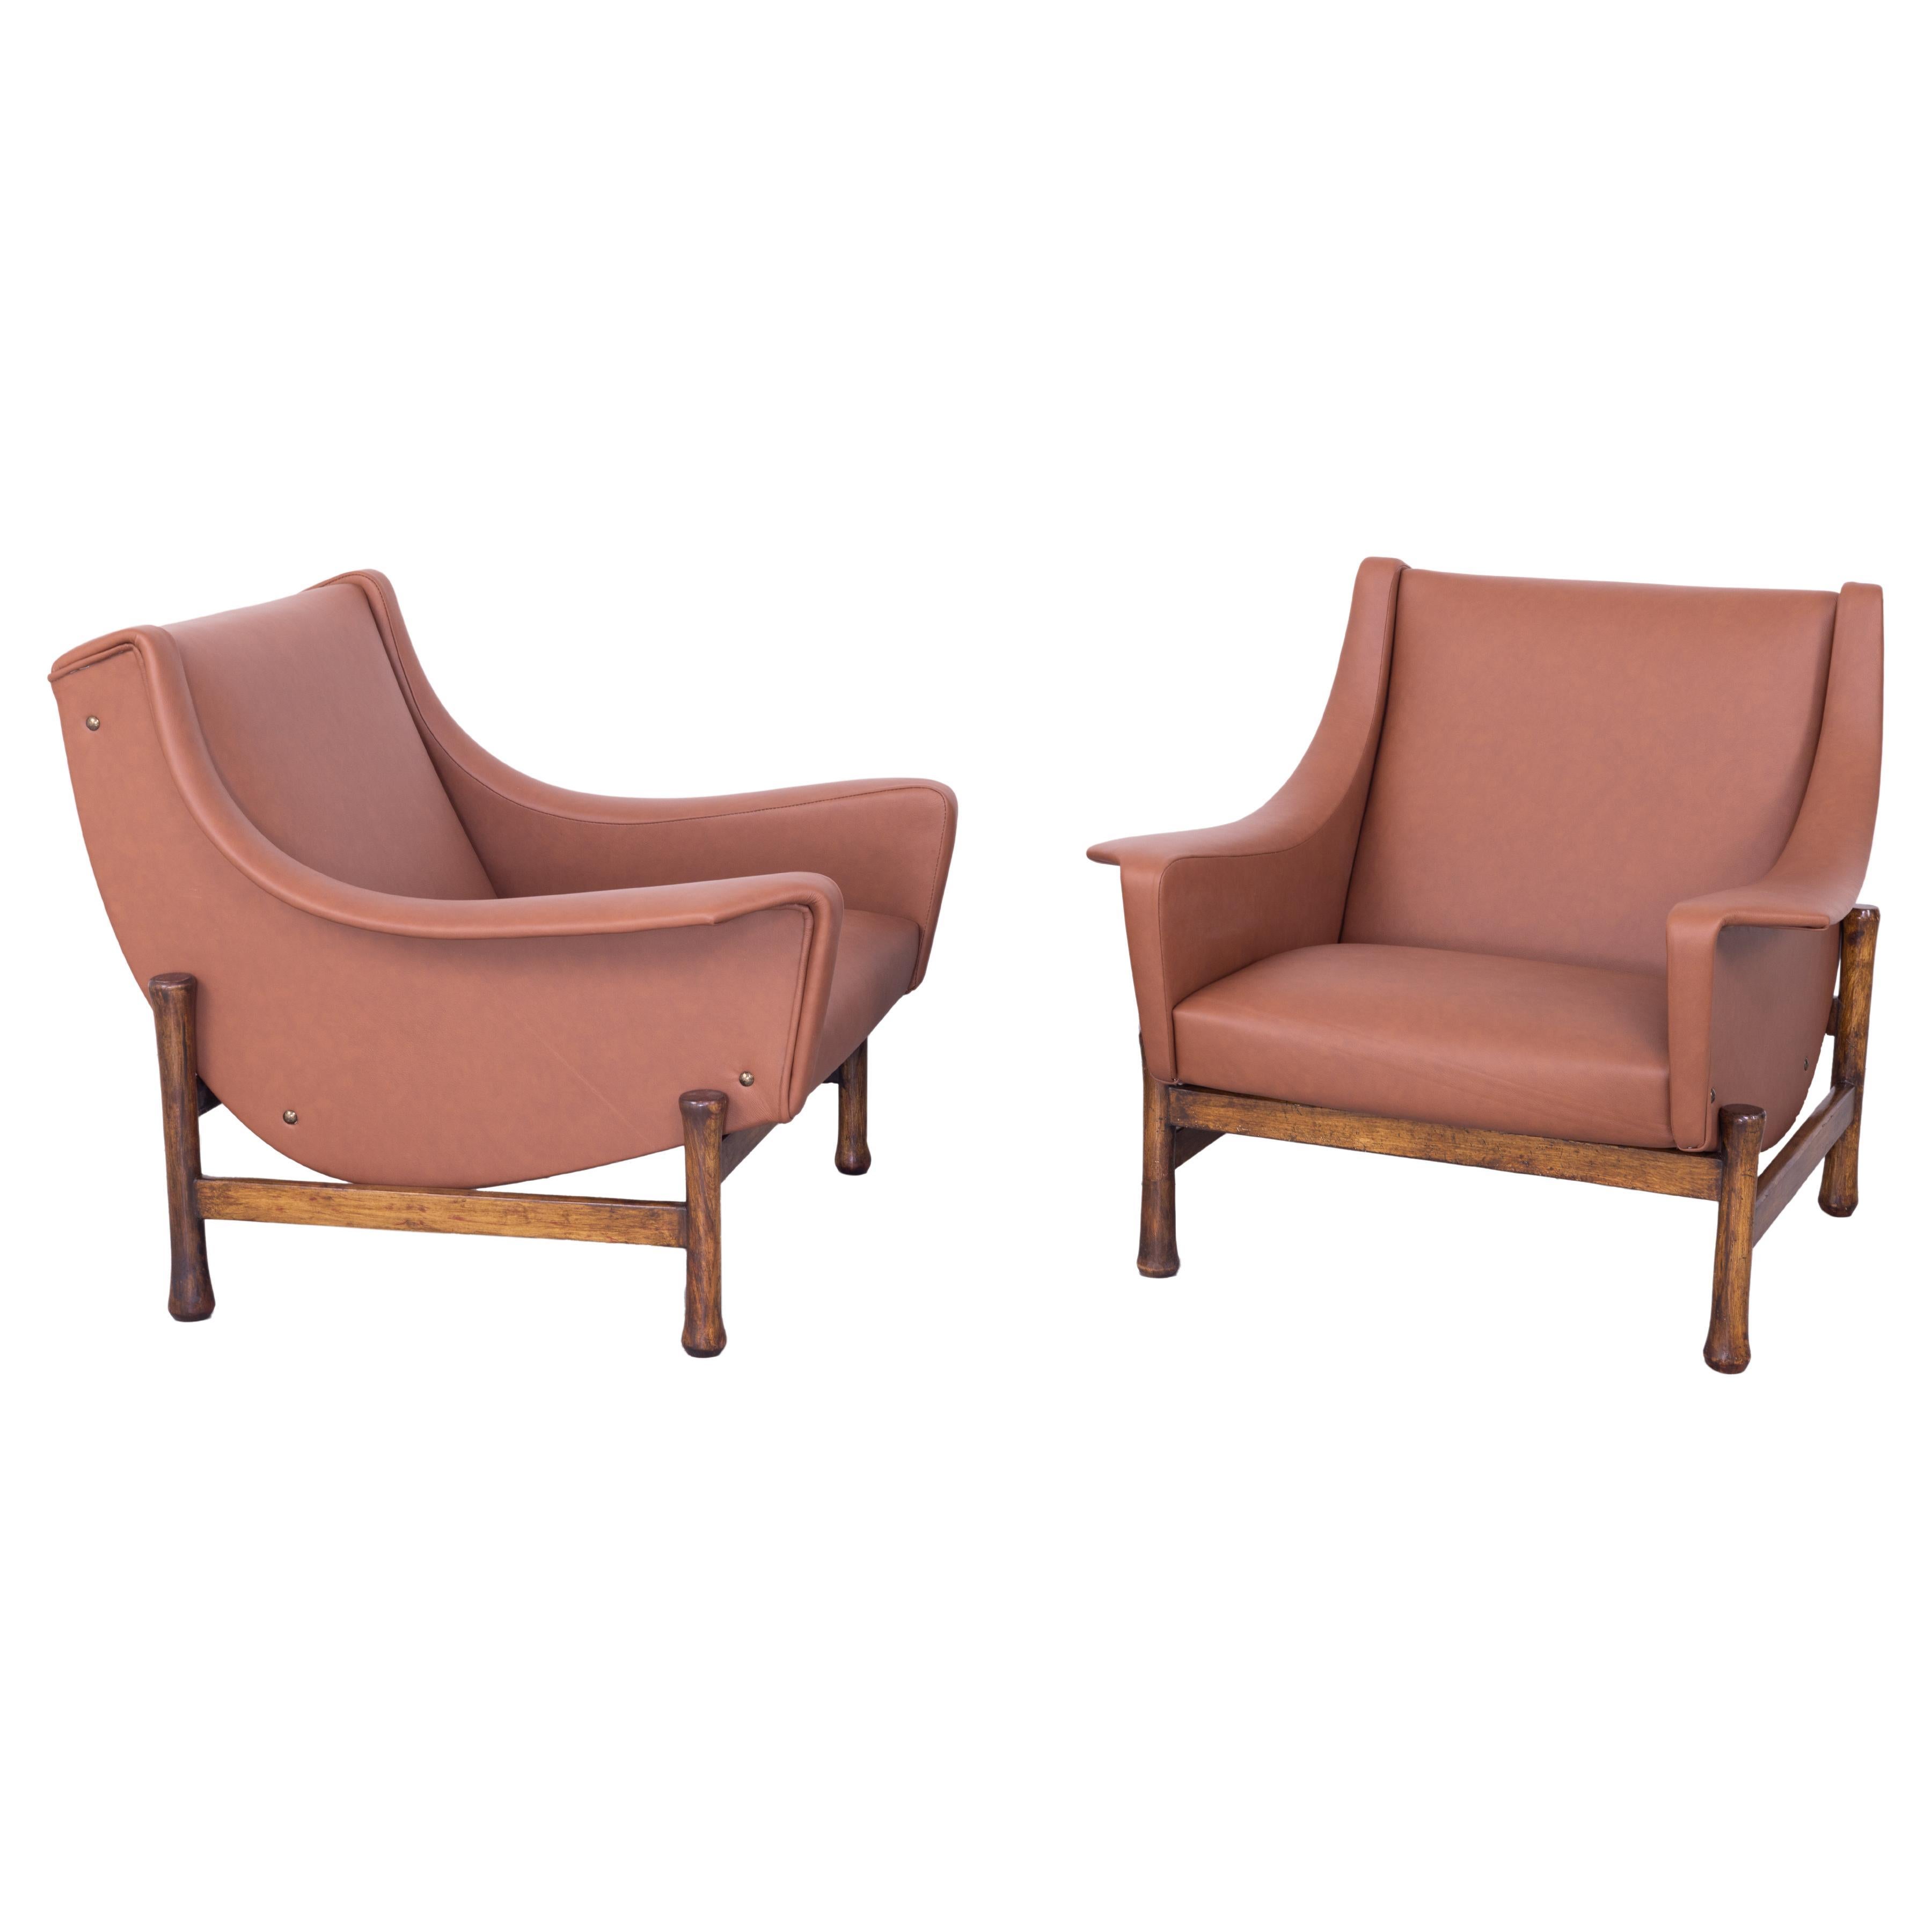 Pair of Lounge Chairs Tobia Scarpa for Formanova, Italy, 1960s